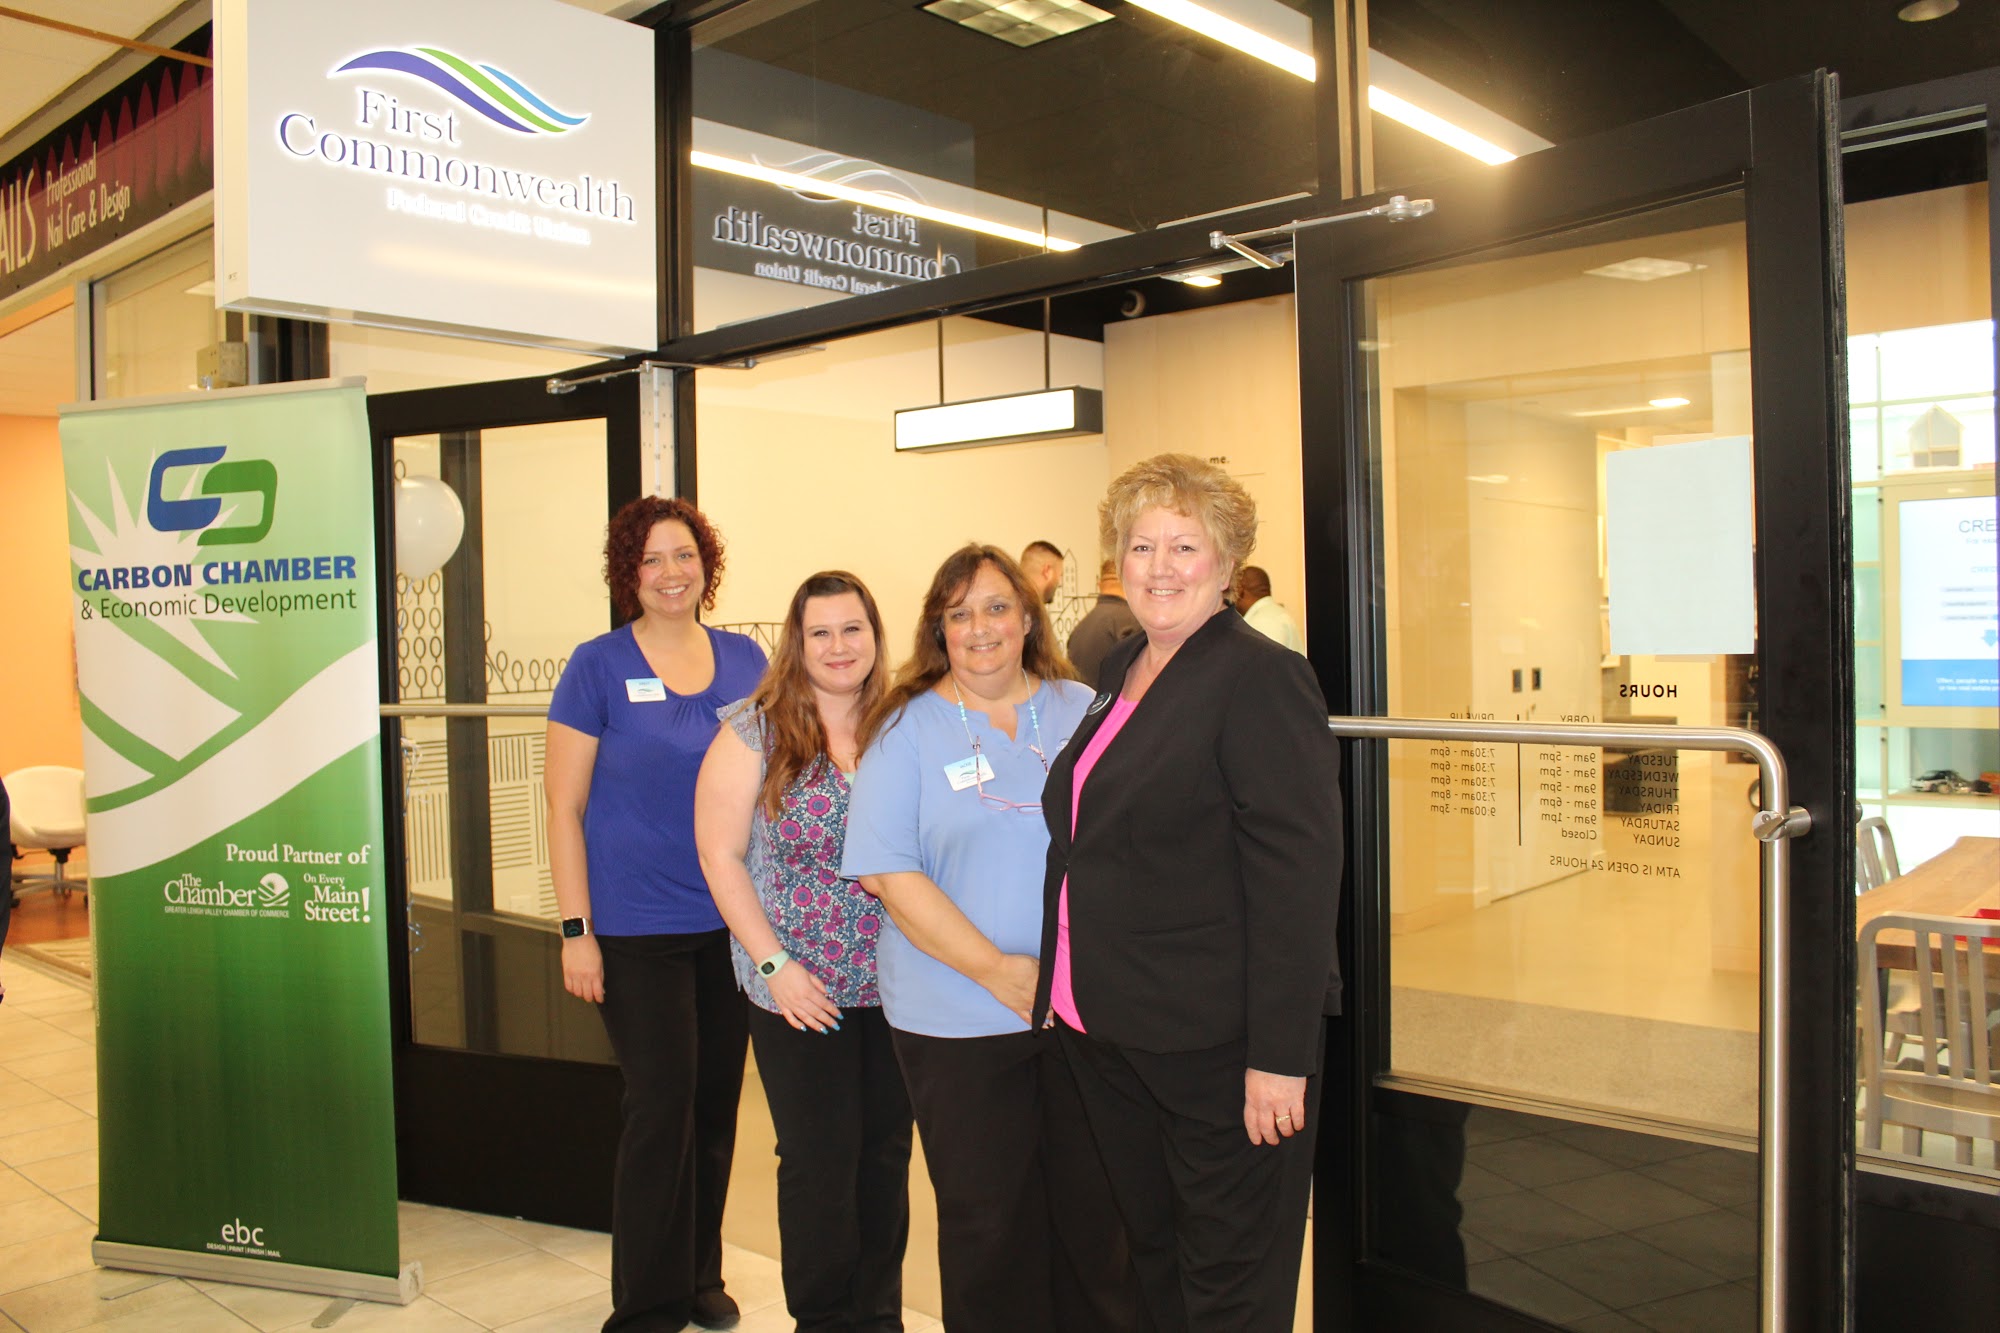 First Commonwealth Federal Credit Union